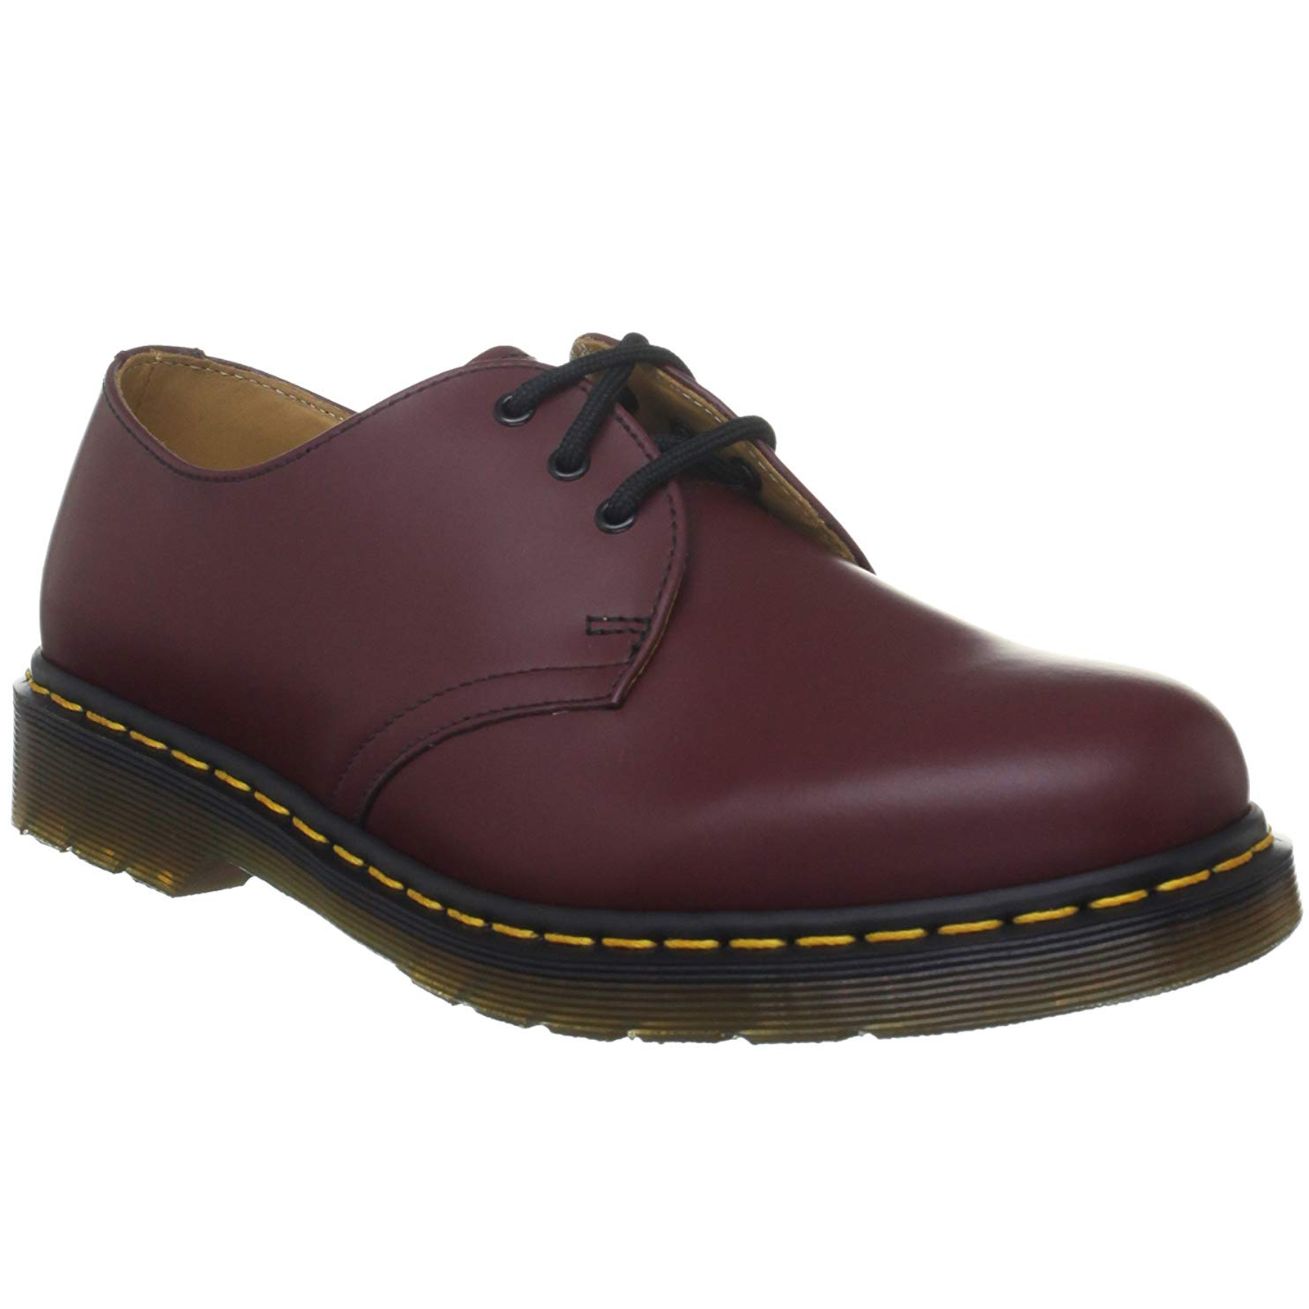 Dr. Martens 1461 Smooth Leather Women's Oxford Shoes#color_cherry